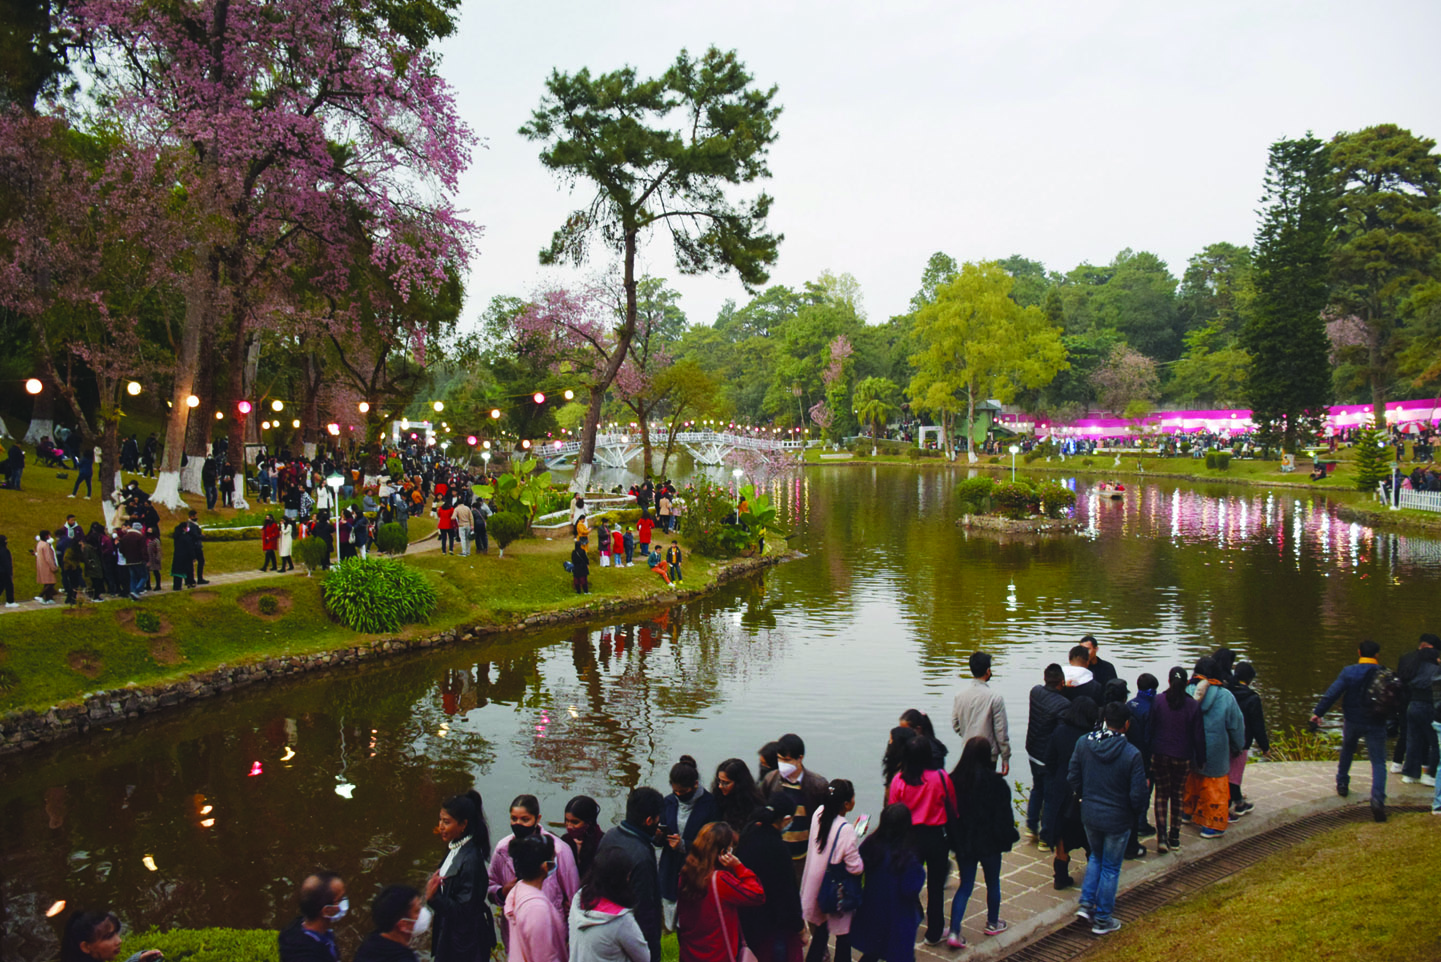 People Throng The Scenic Wards Lake On The Final Day Of Cherry Blossom